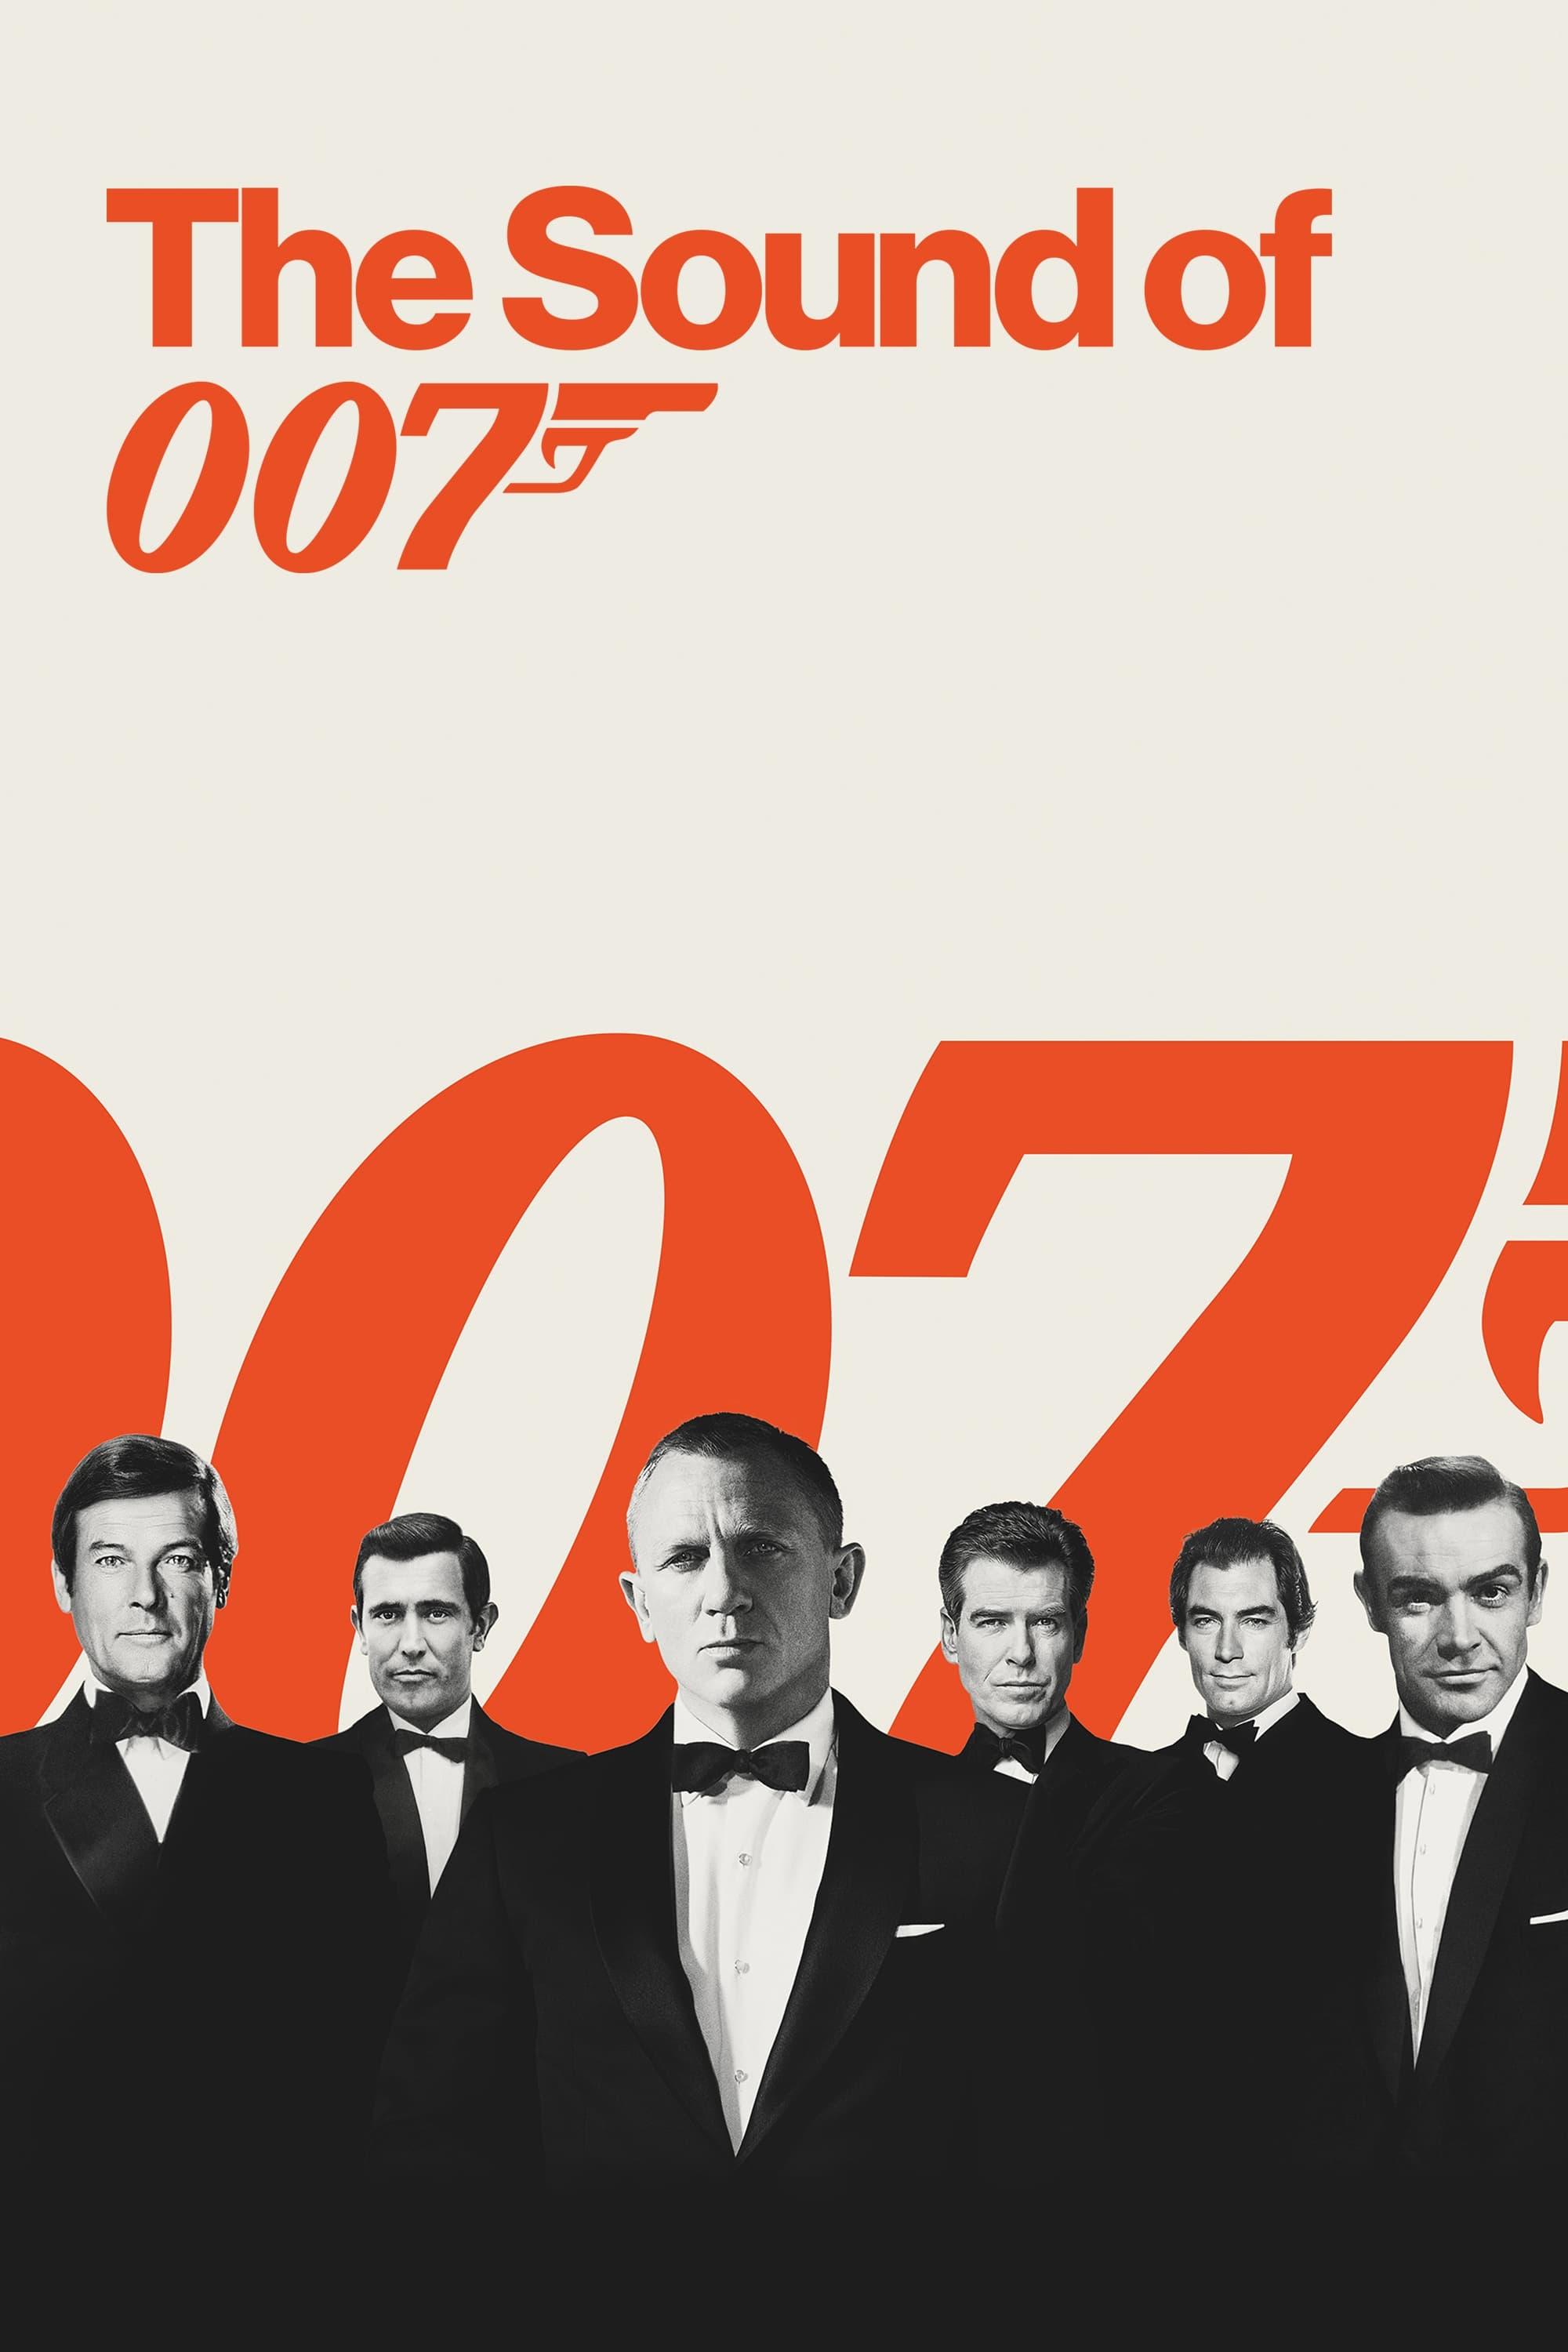 The Sound of 007 poster